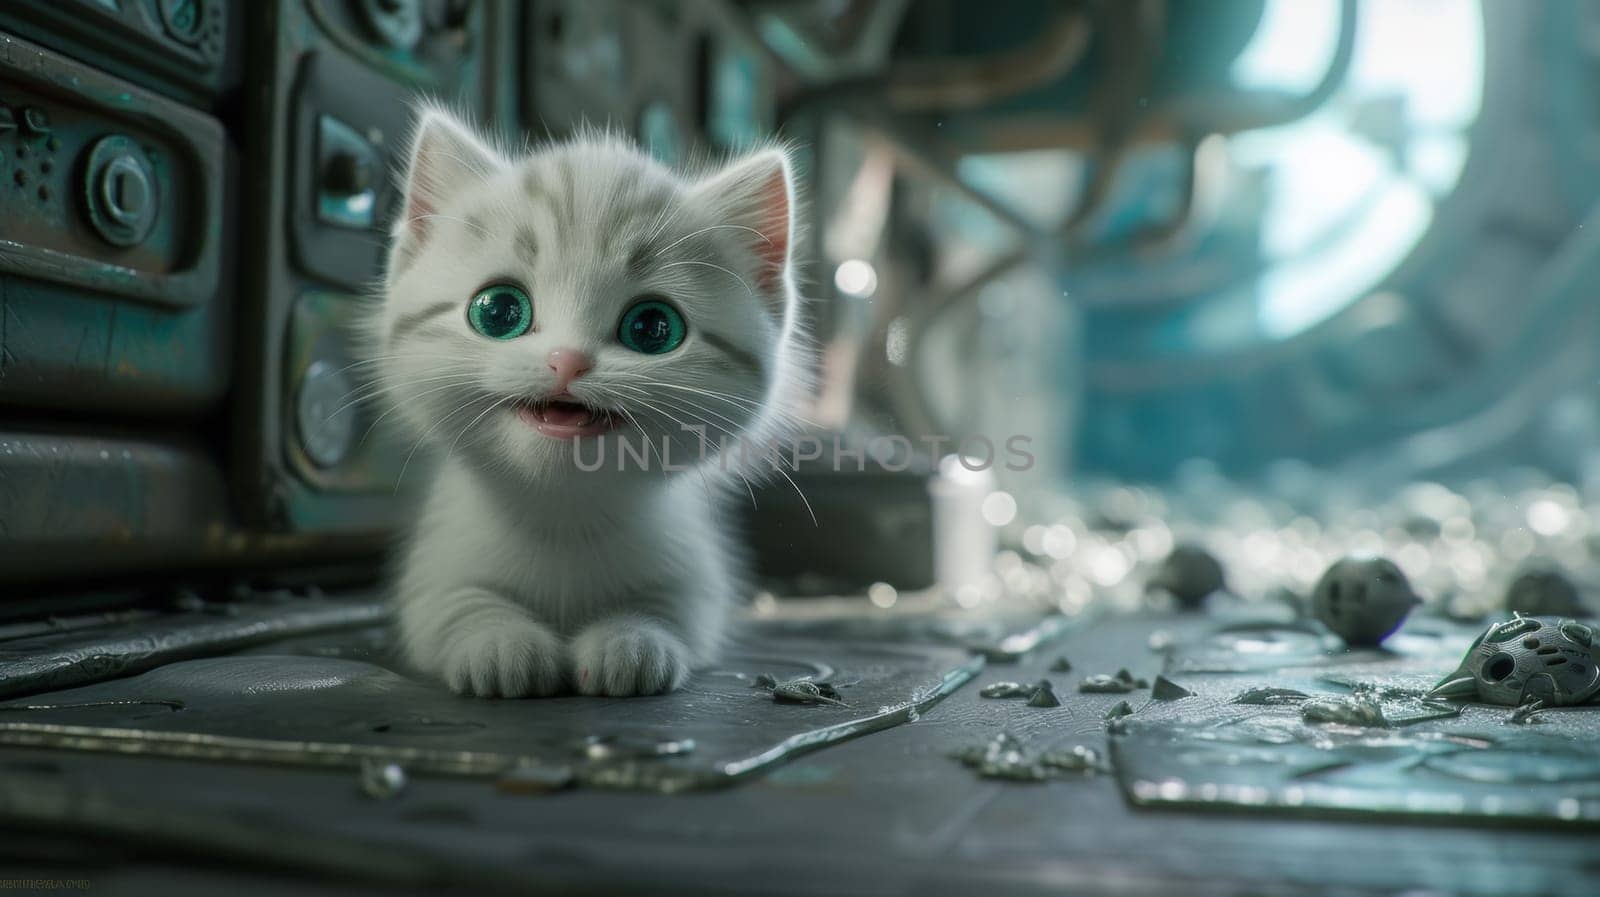 A white kitten with green eyes sitting on a table